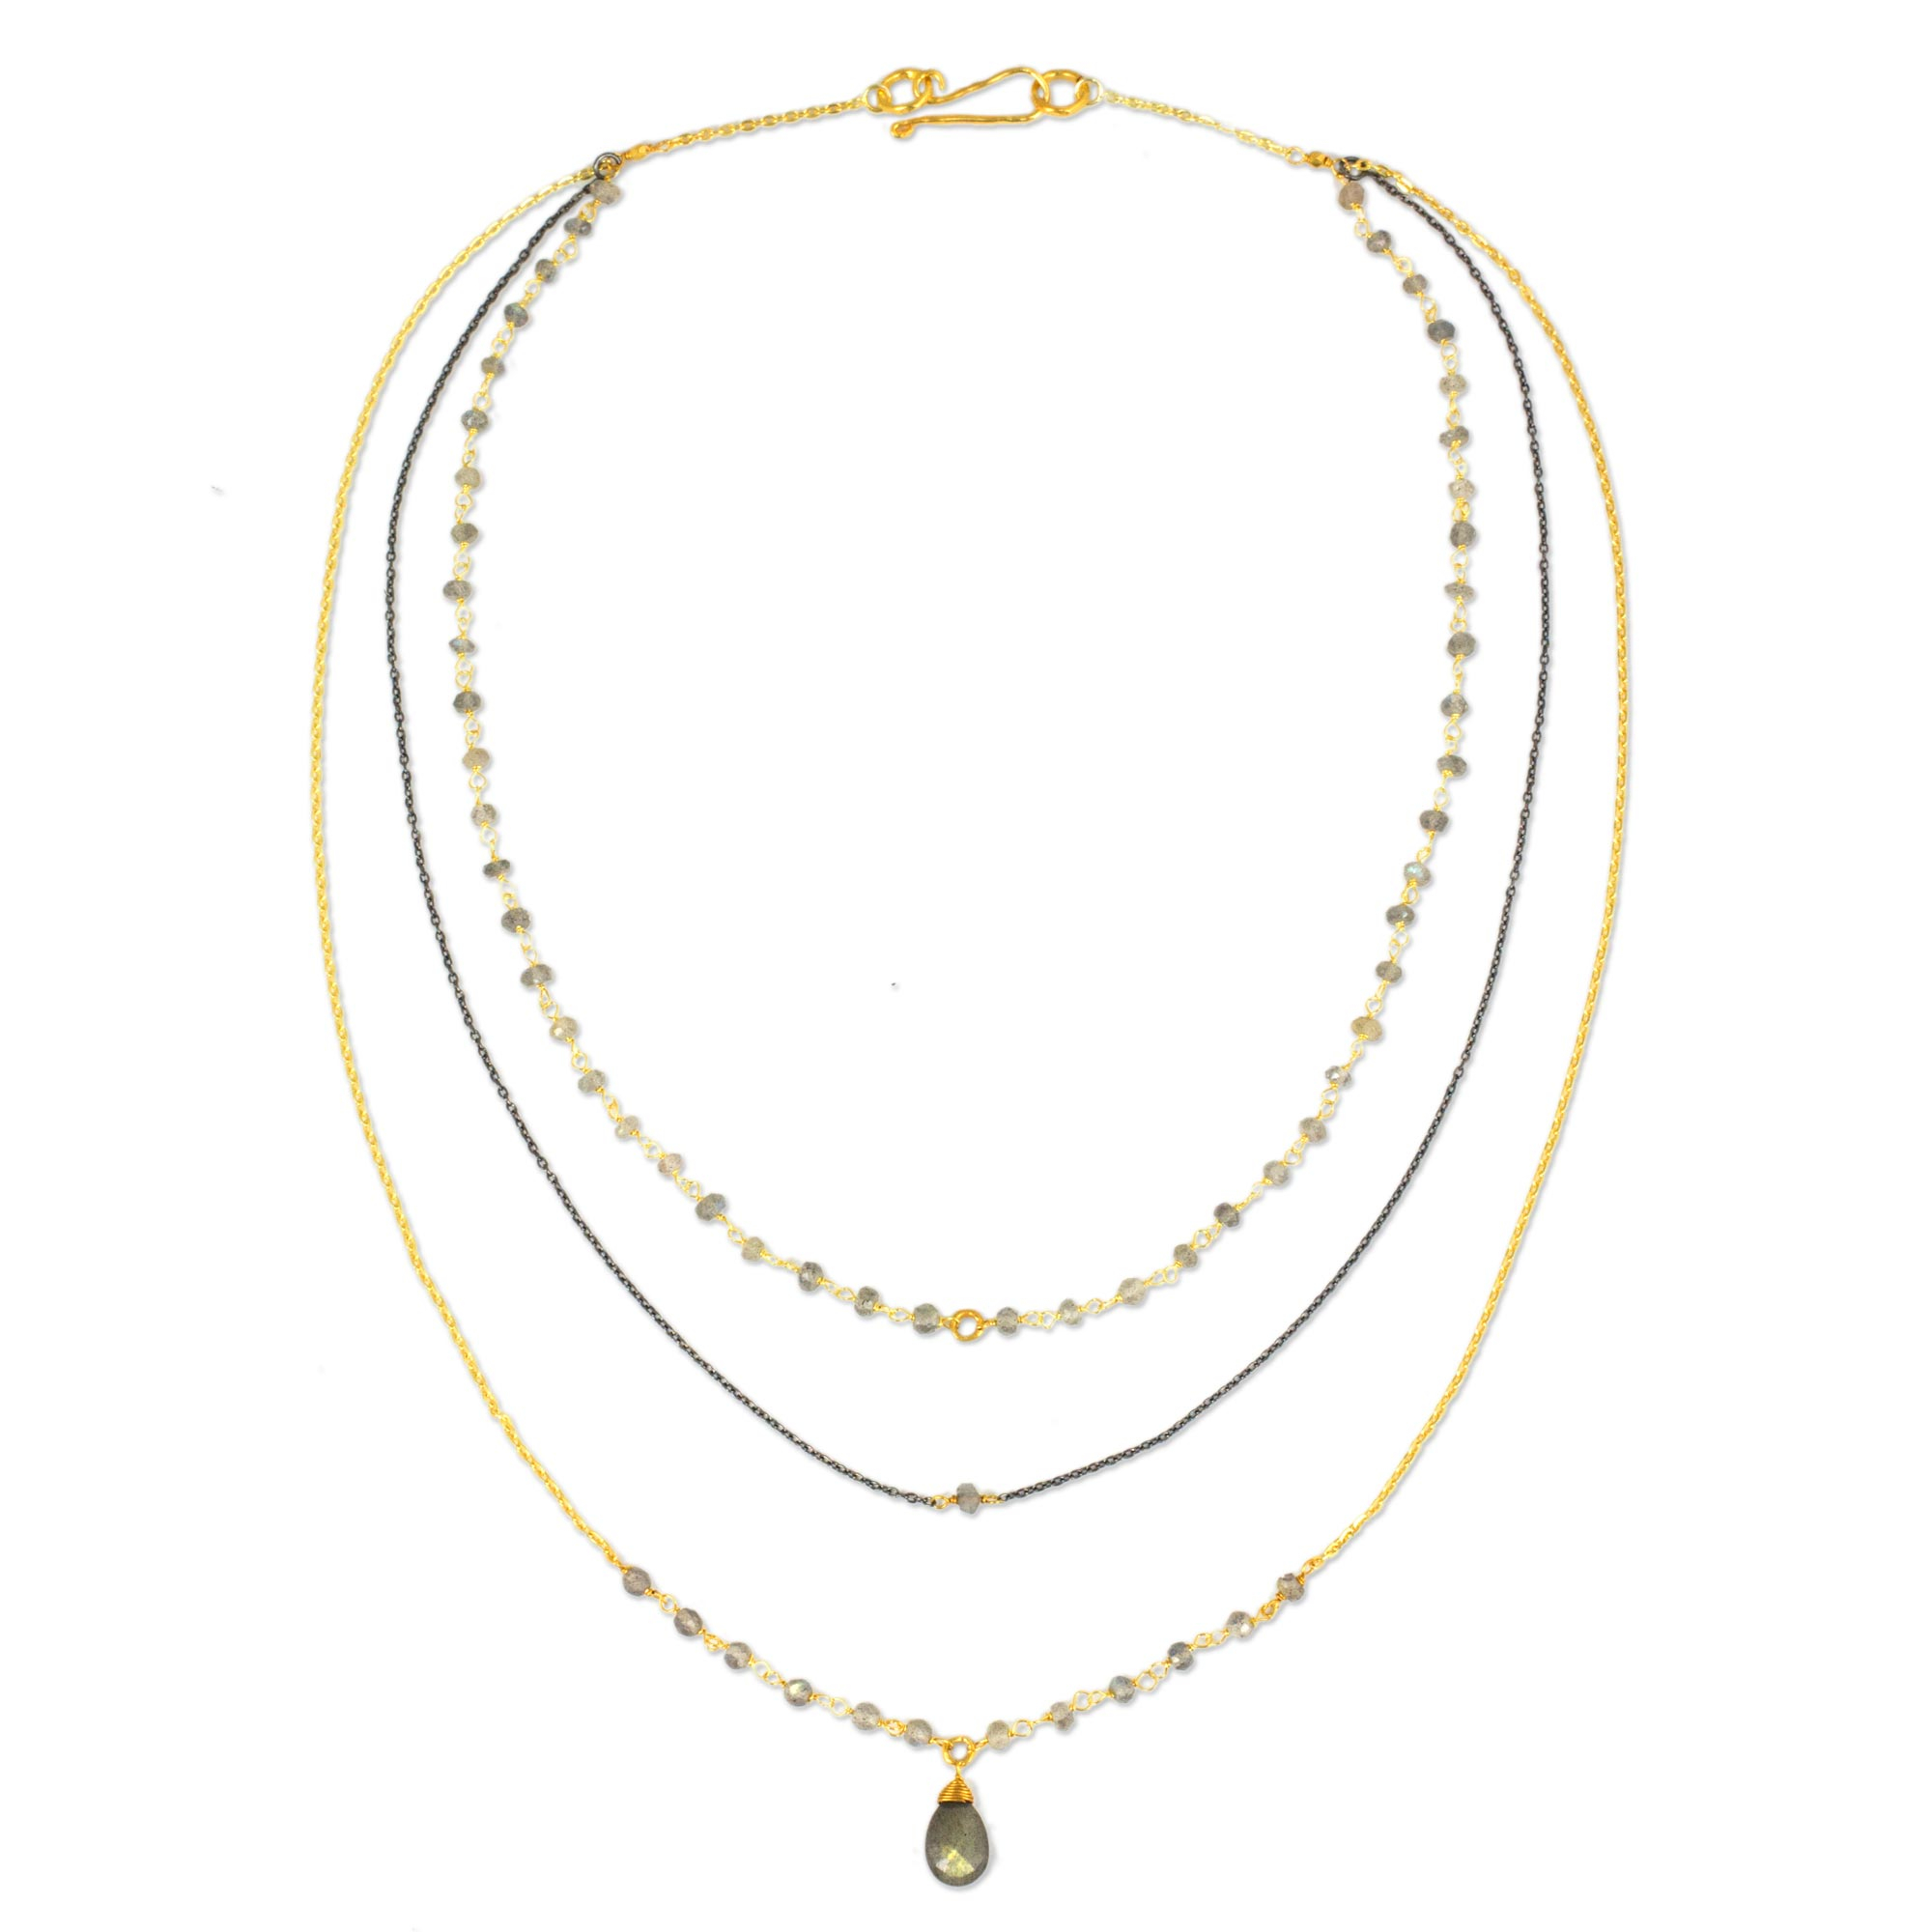 UNICEF Market | 3-in-1 Necklace Vermeil and Labradorite Handcrafted ...